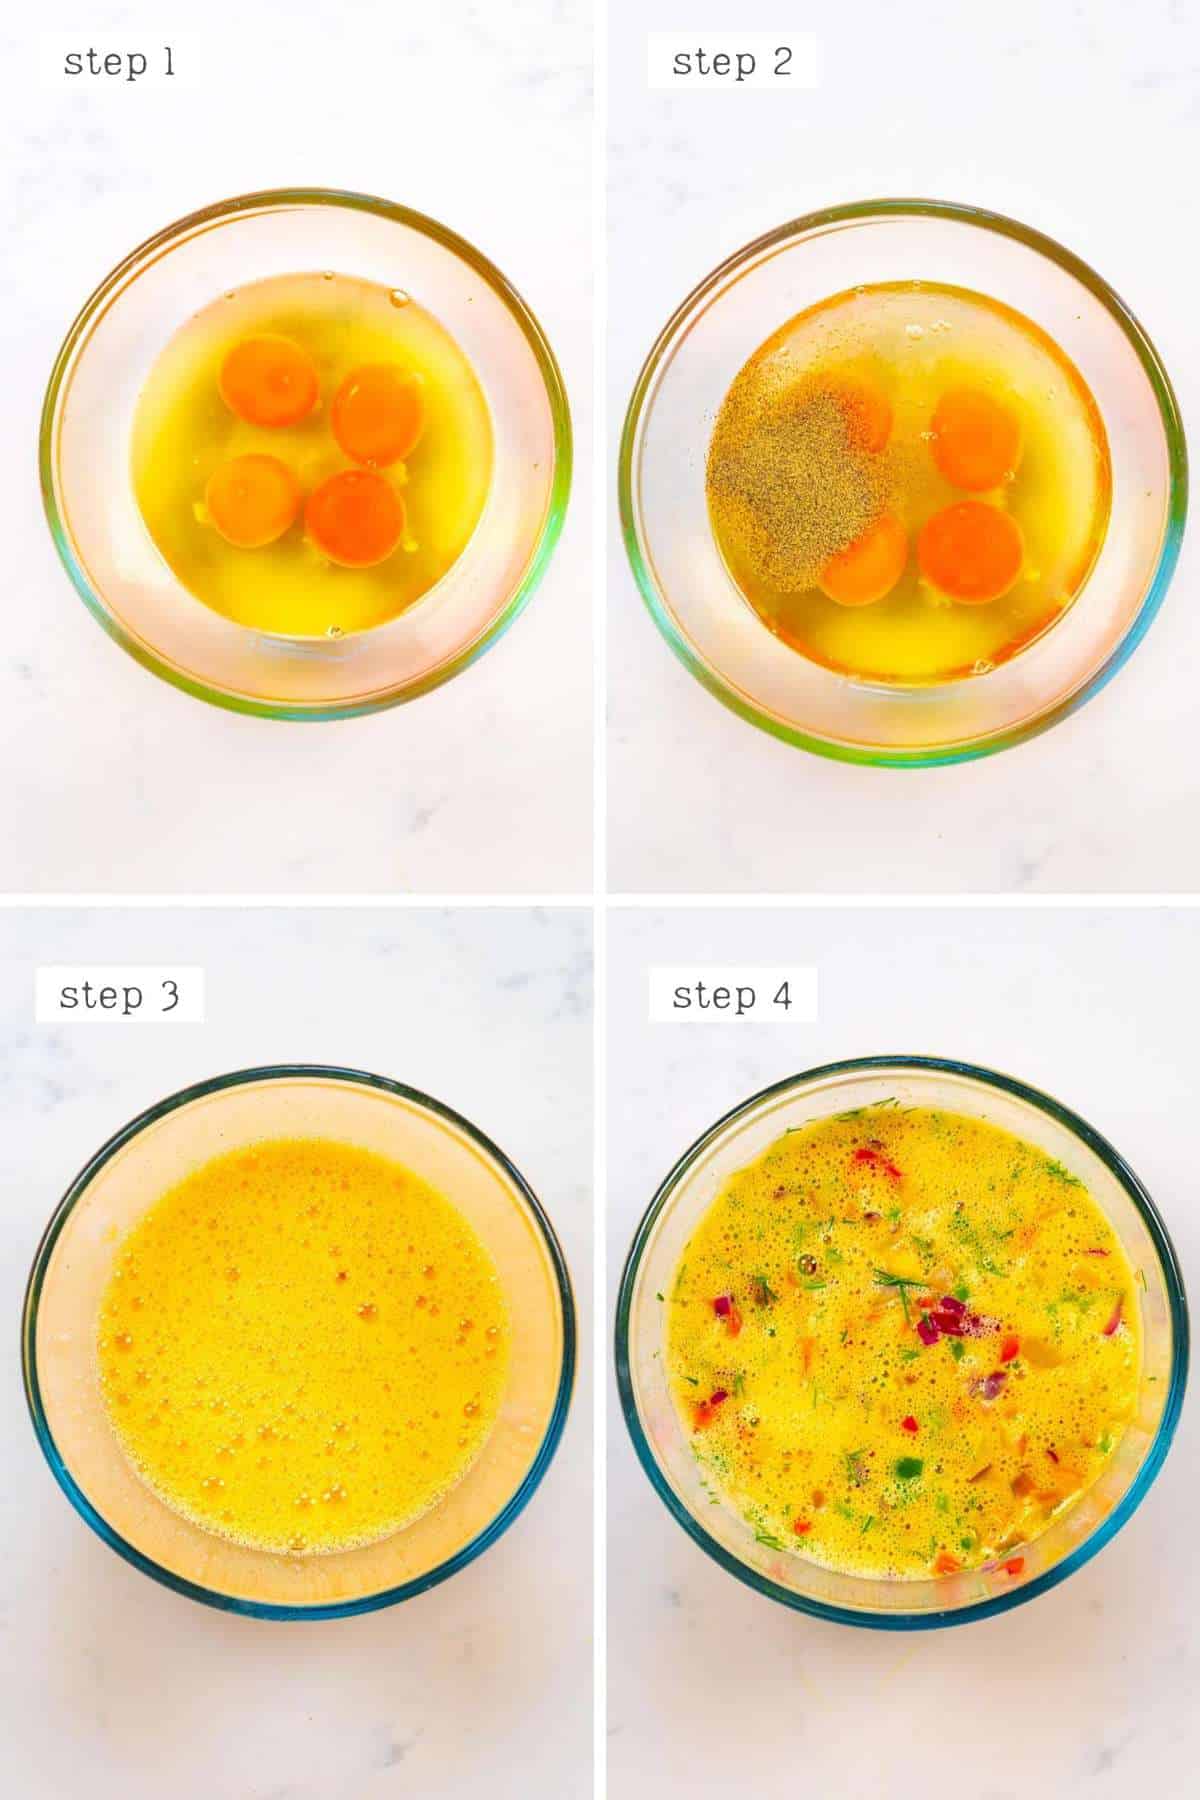 steps for mixing eggs and veggies for omelette